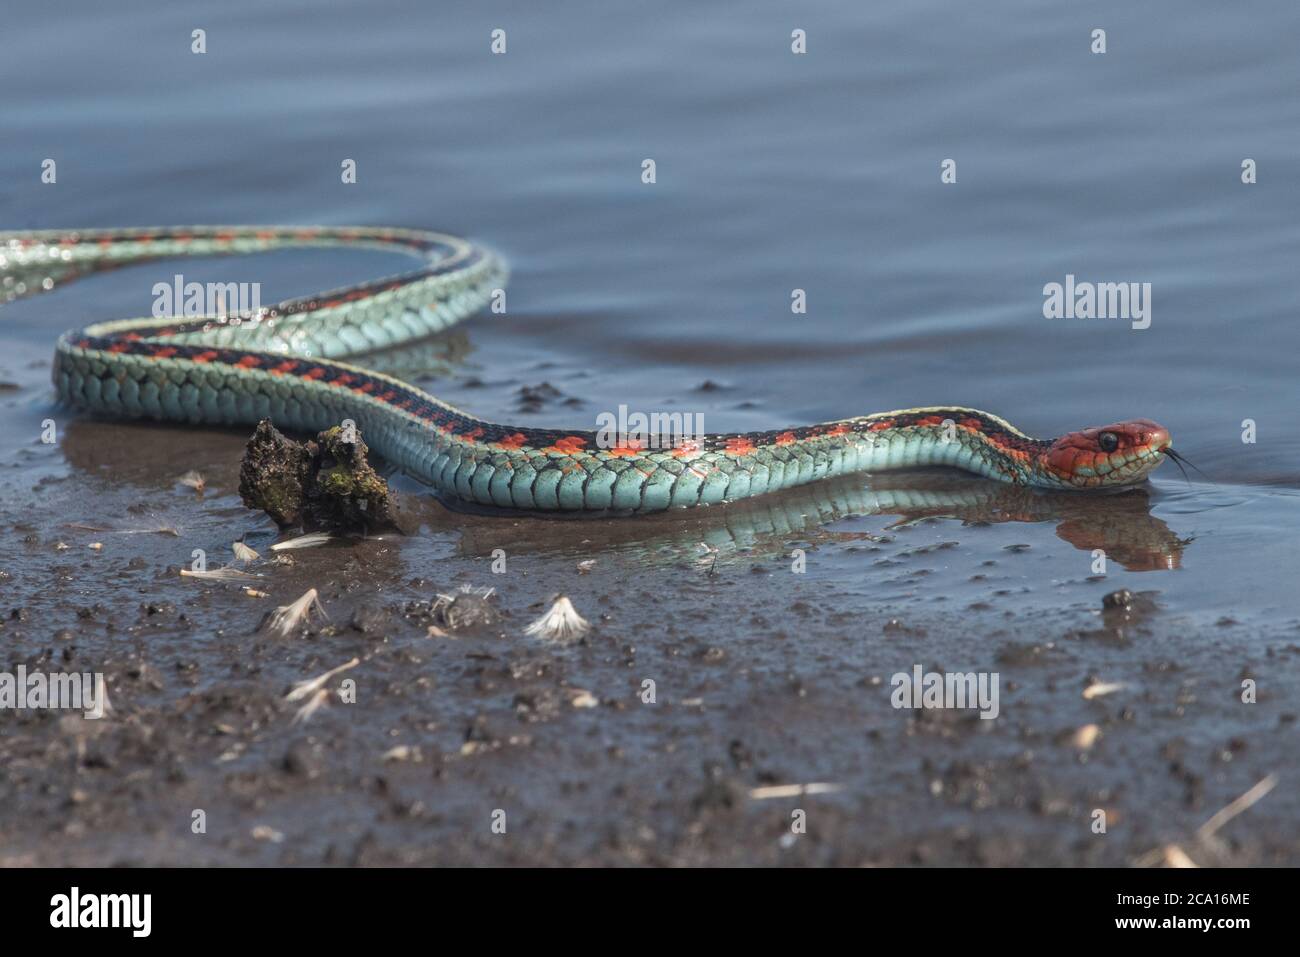 A California red sided garter snake (Thamnophis sirtalis infernalis), arguably one of the most beautiful snakes of North America. Stock Photo